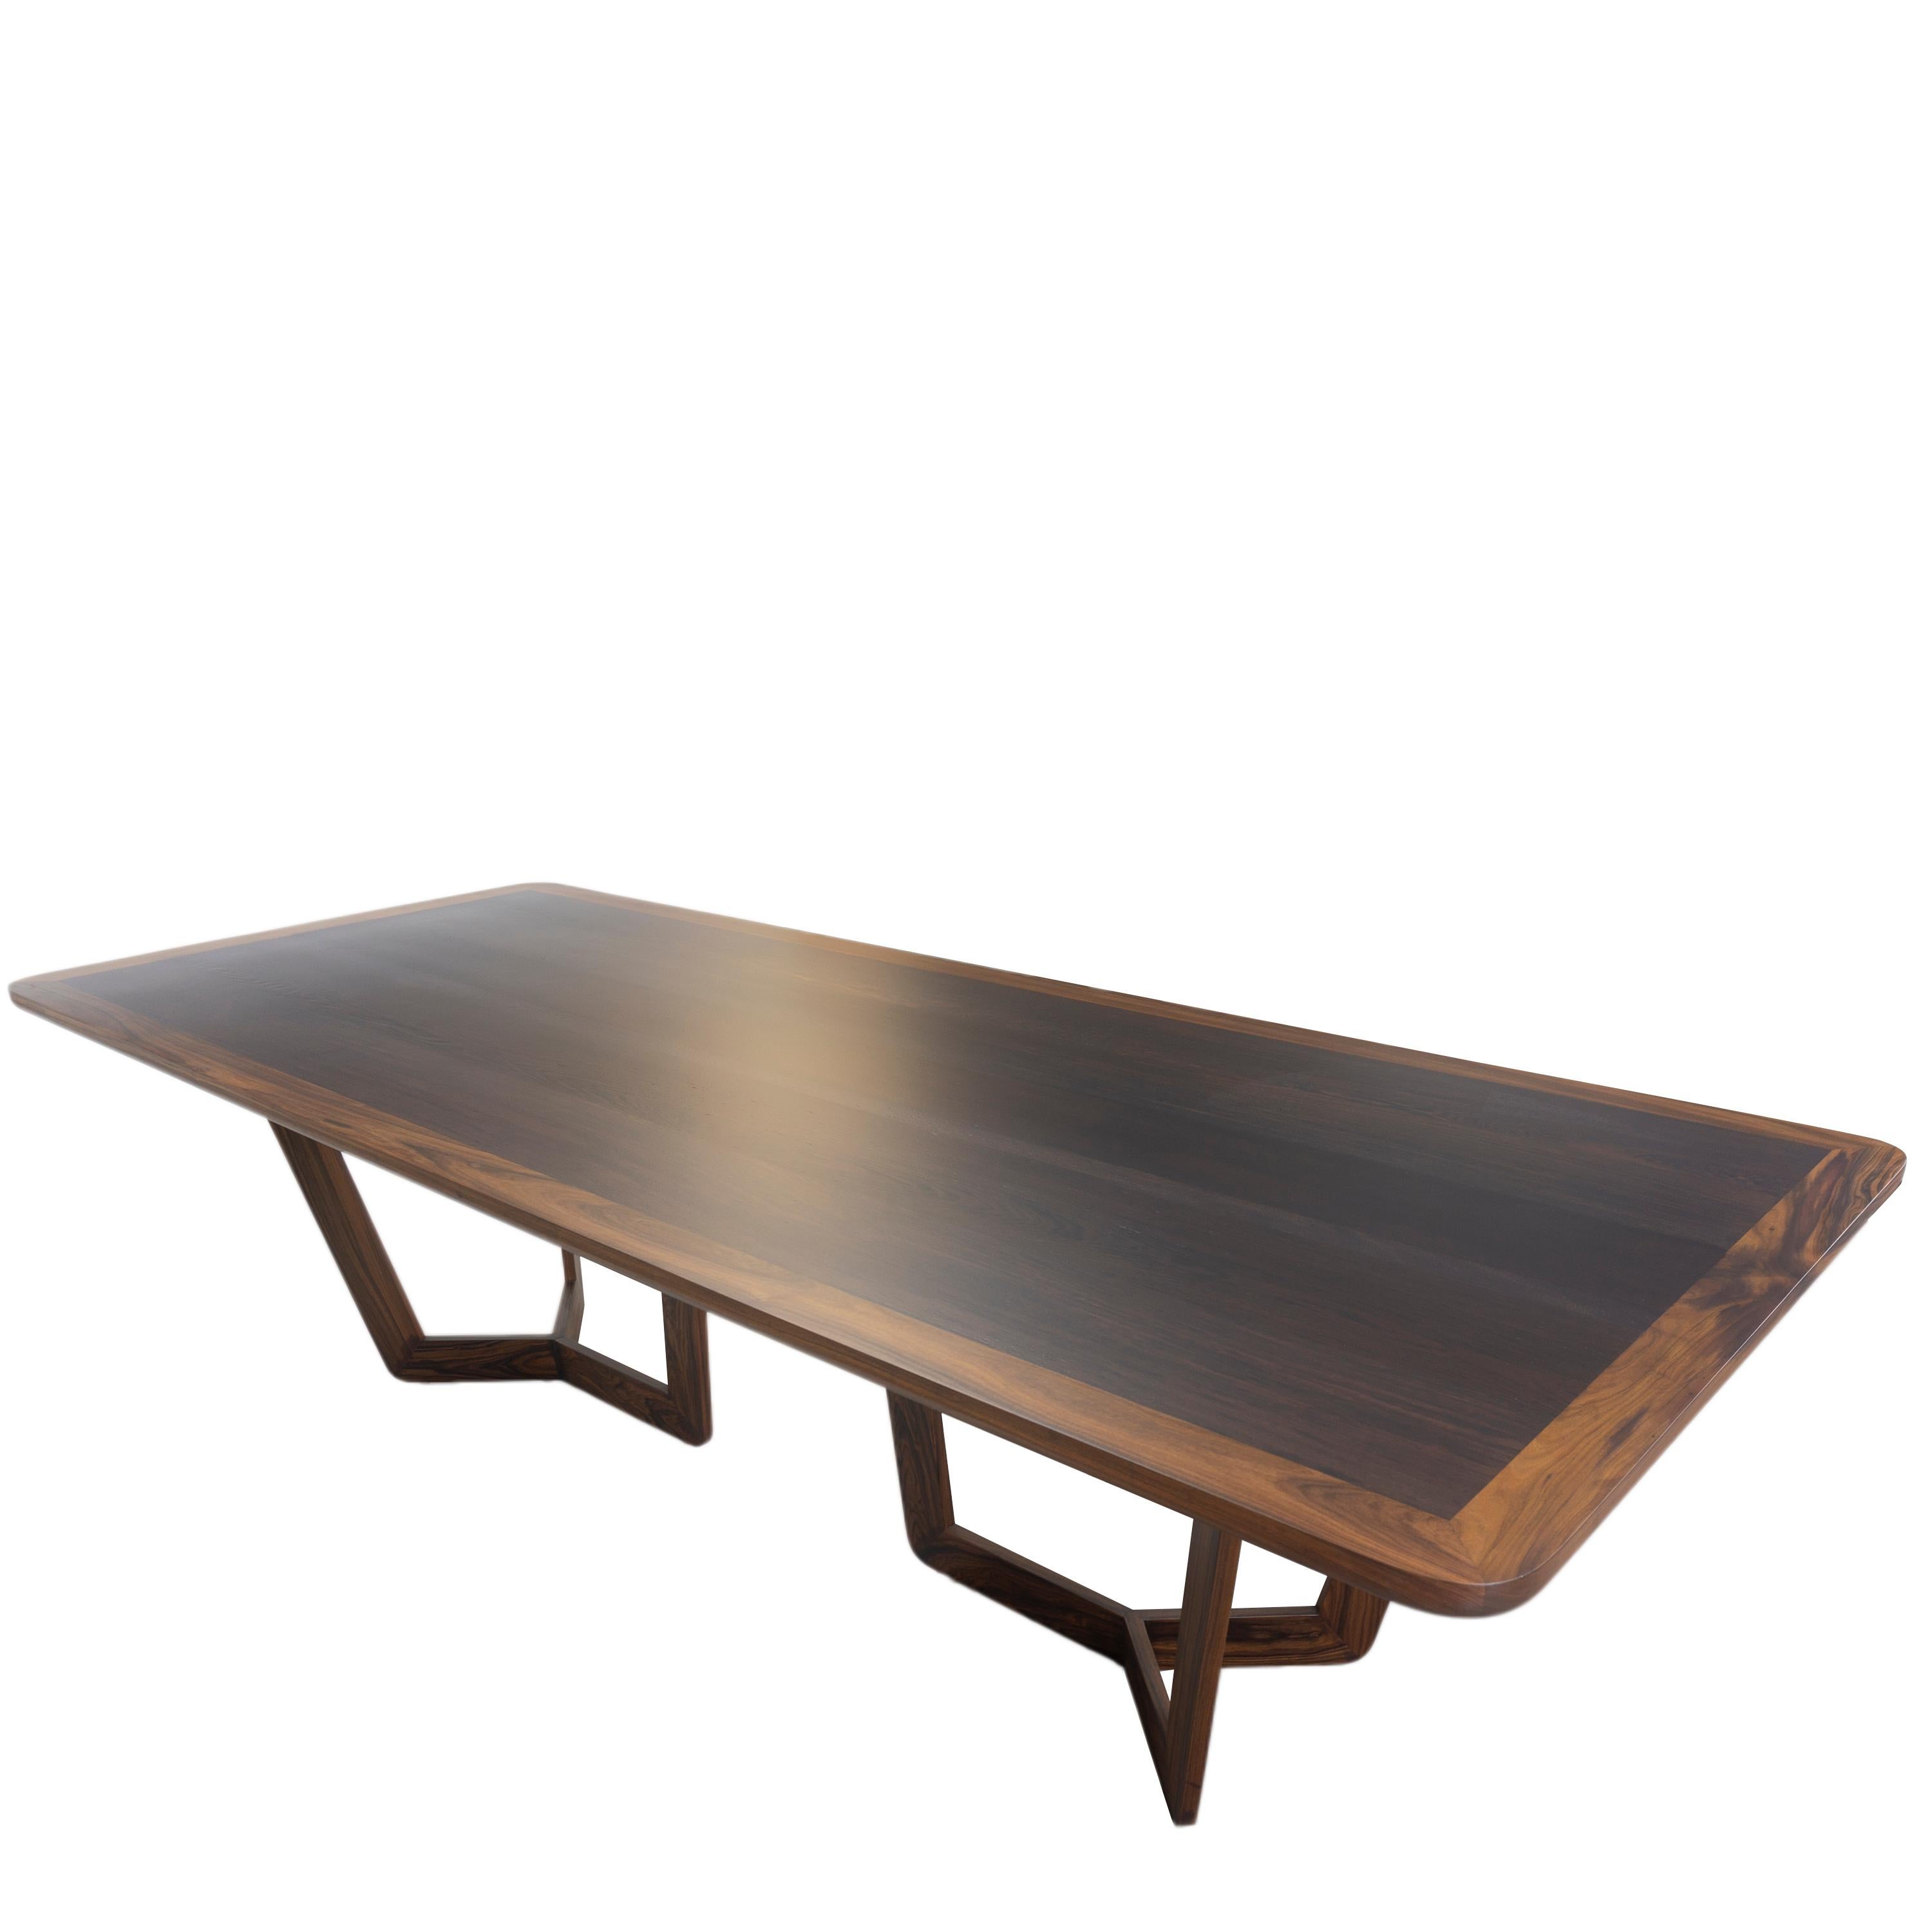 The Y dining table is both functional and modern. The top is Wenge wood with grain surrounded by a 3 inch Morado wood border and base. Lightly stained to show the natural contours of the wood. Available now as shown. 

Handcrafted and constructed